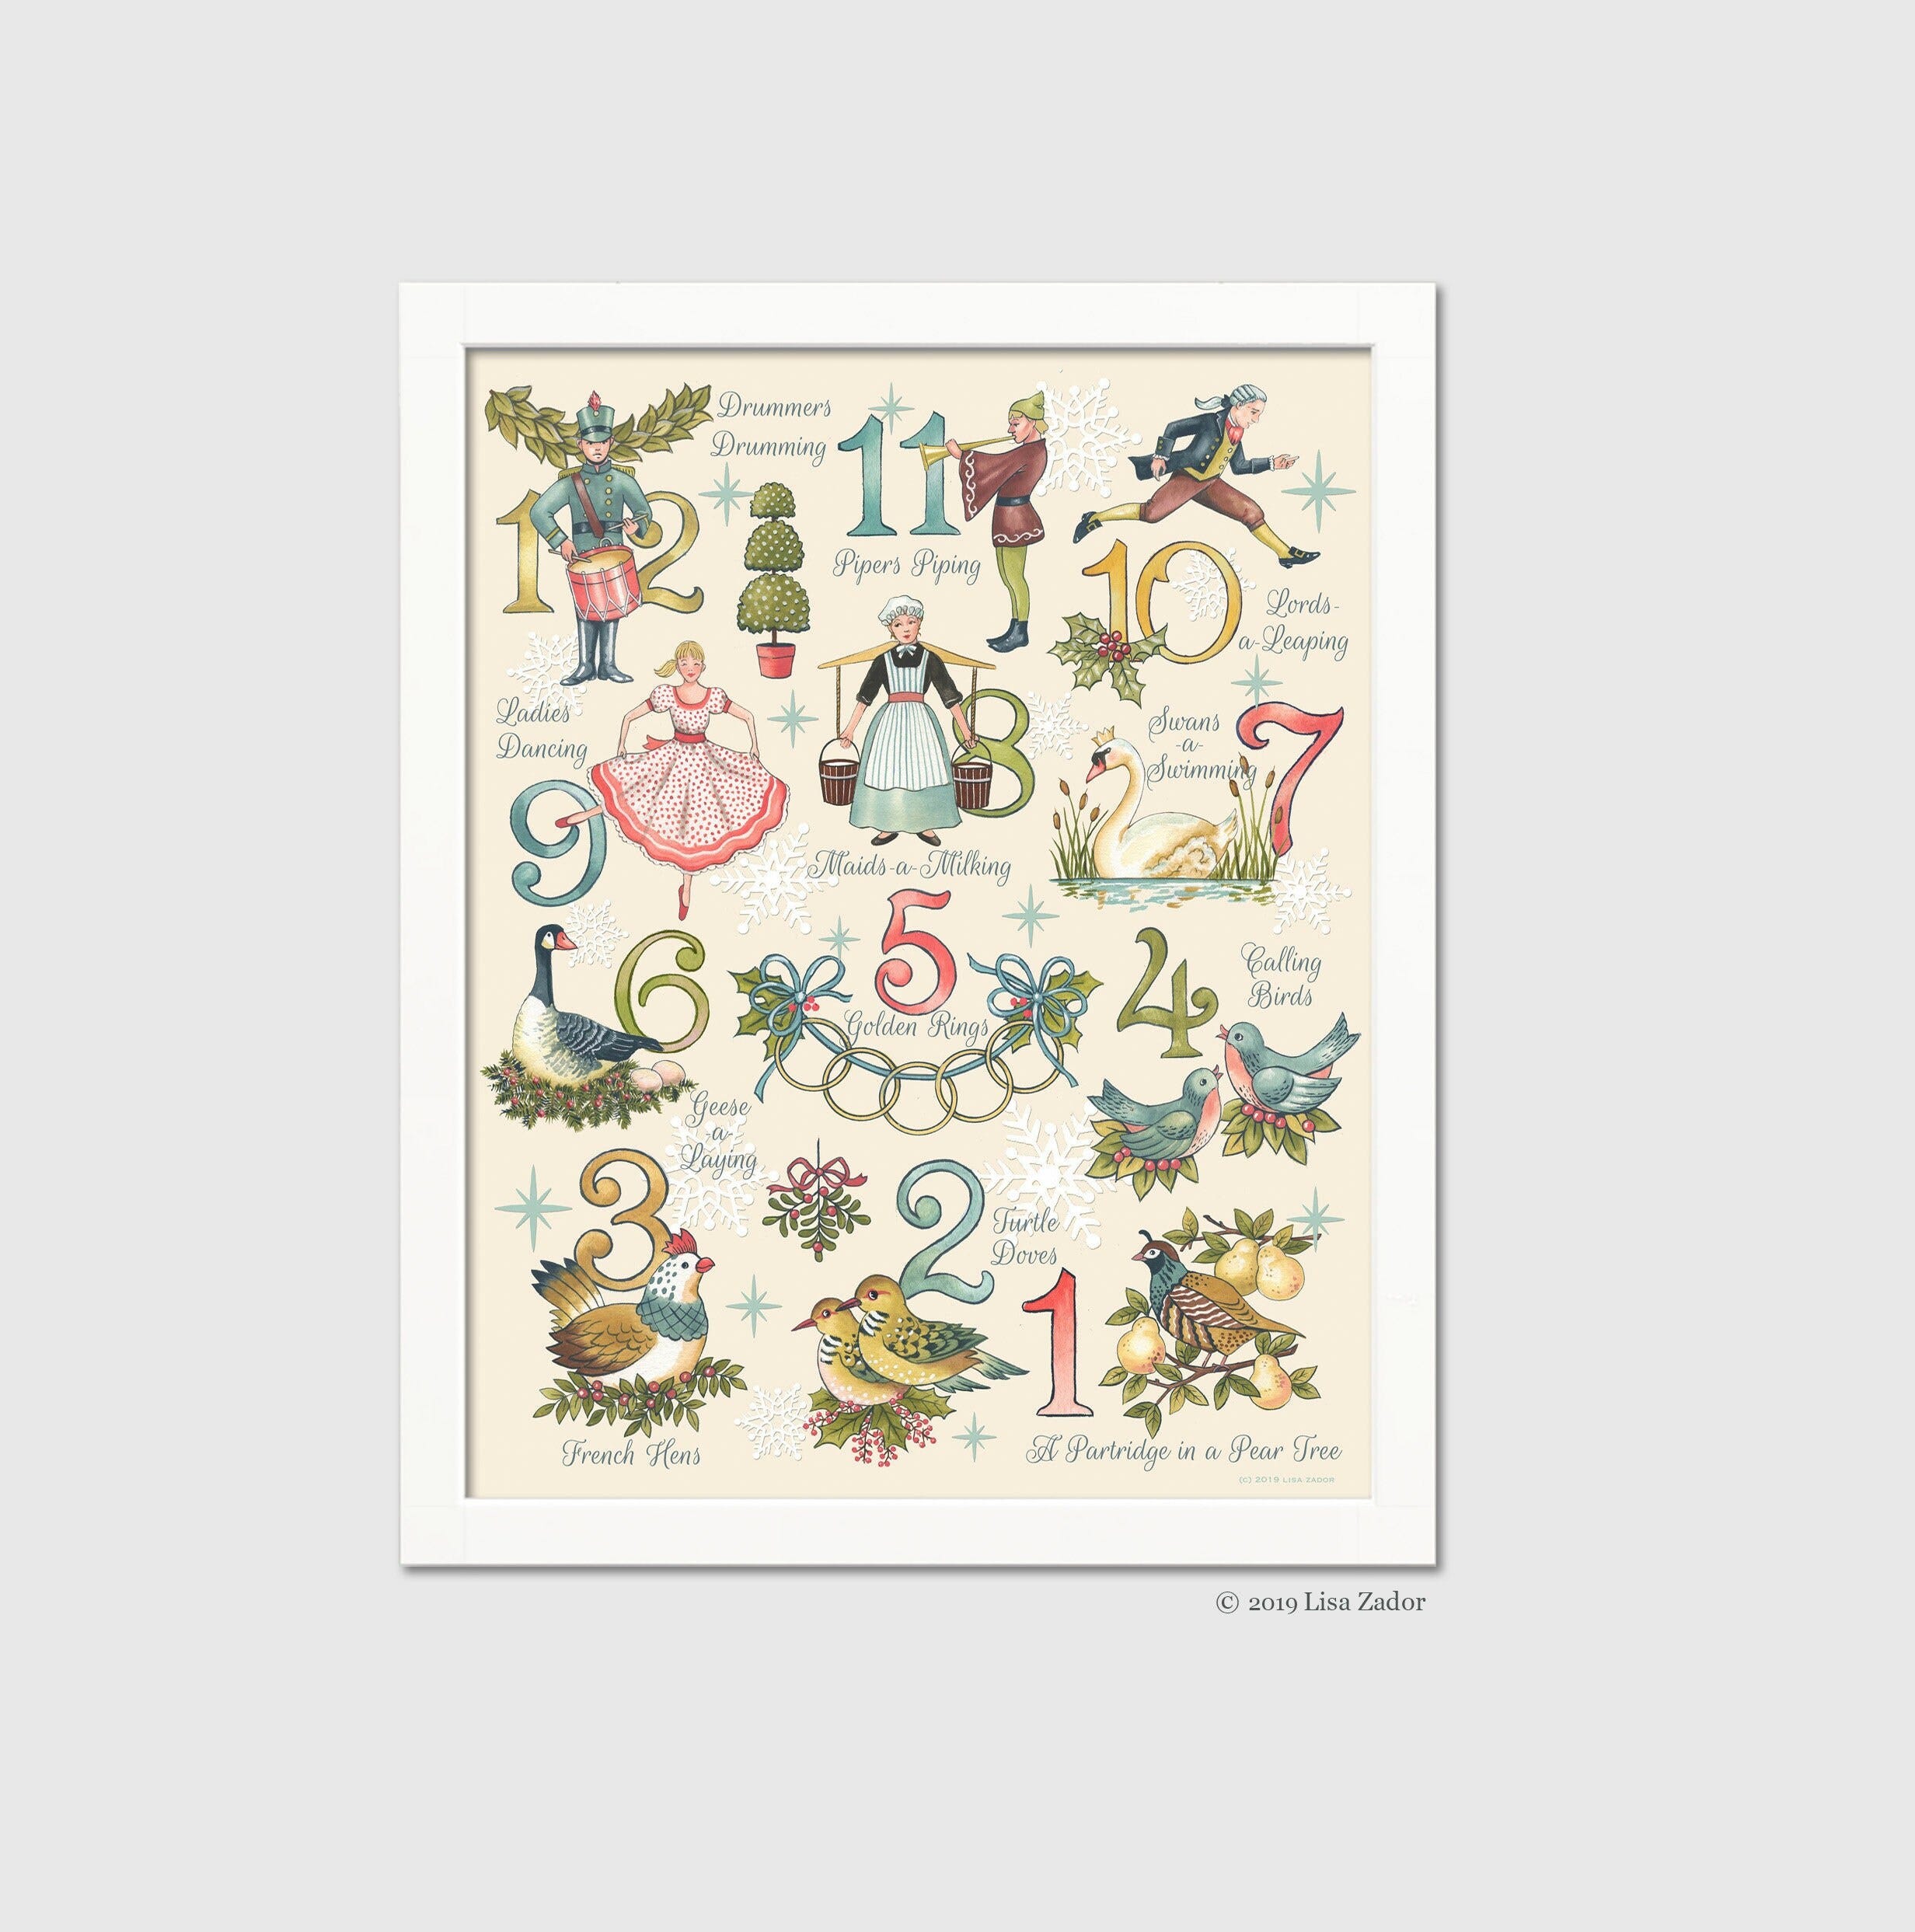 Twelve Days of Christmas Print from Original Artwork , Nostalgic Old Fashioned Christmas Artwork, Partridge in a Pear Tree & Turtle Doves,